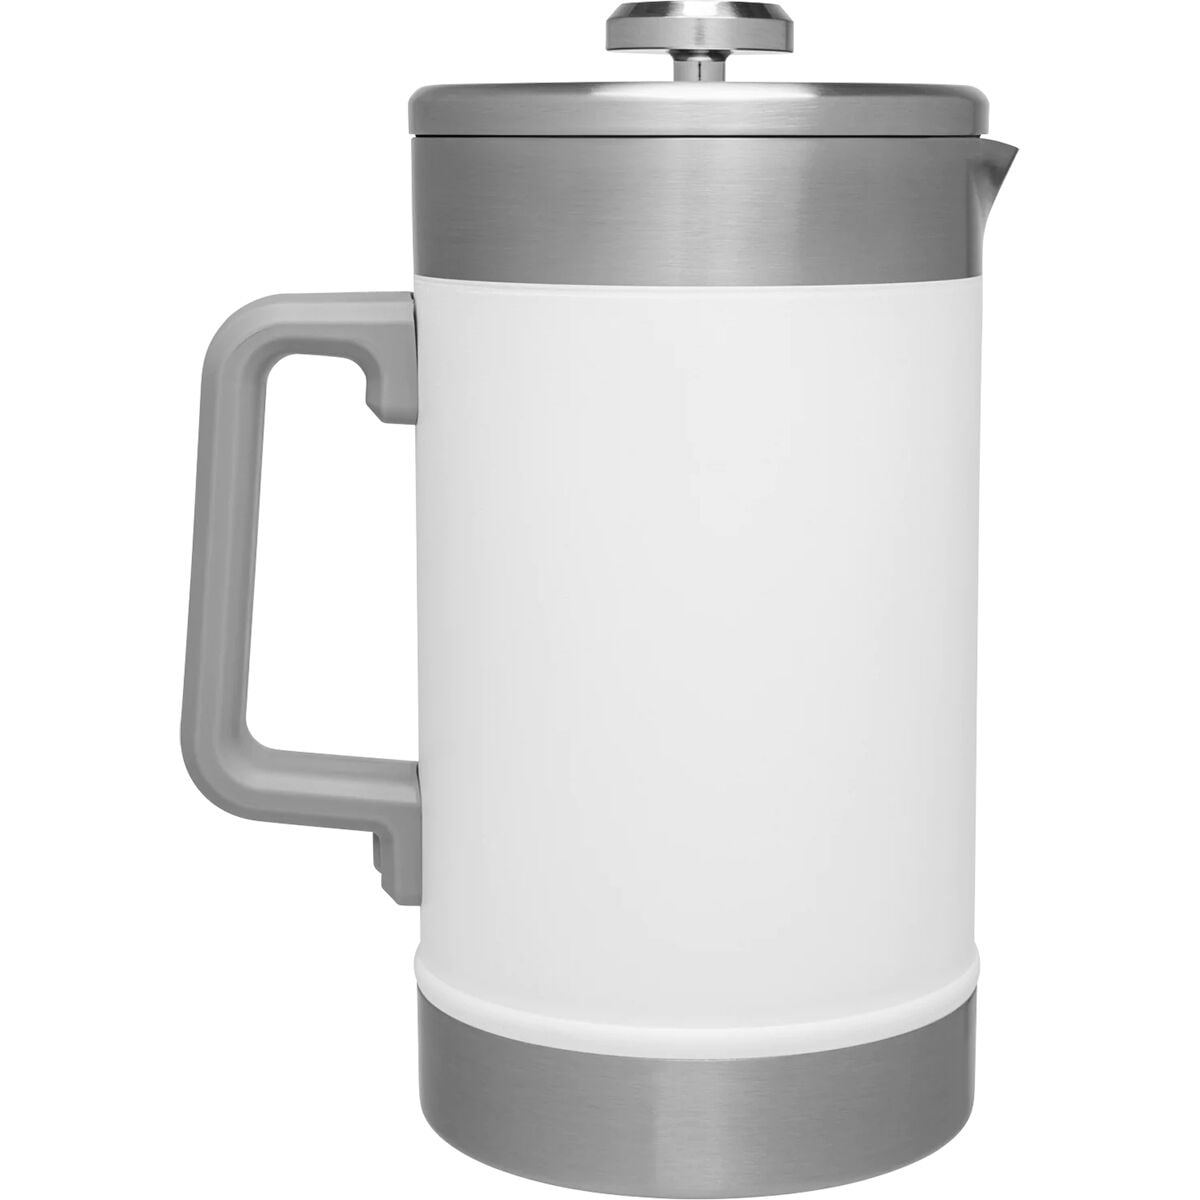 Stanley French Coffee Press - The perfect gift! 